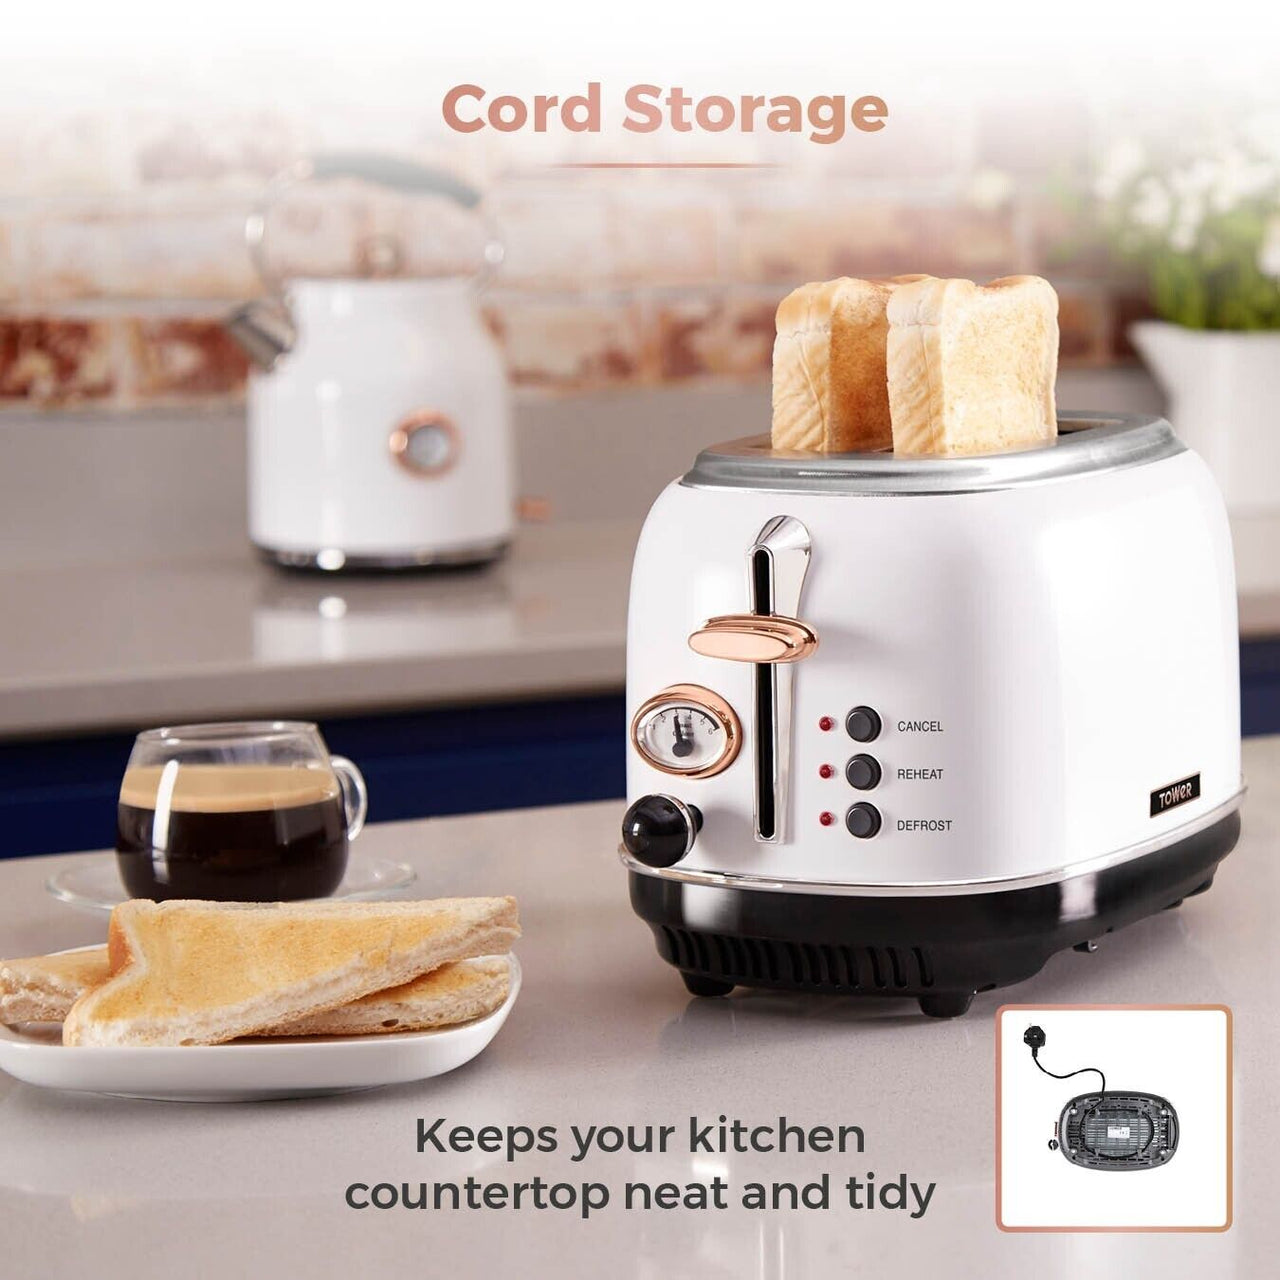 Tower White/Rose Gold Set of 10 Kettle Toaster Microwave Sensor Bin Accessories